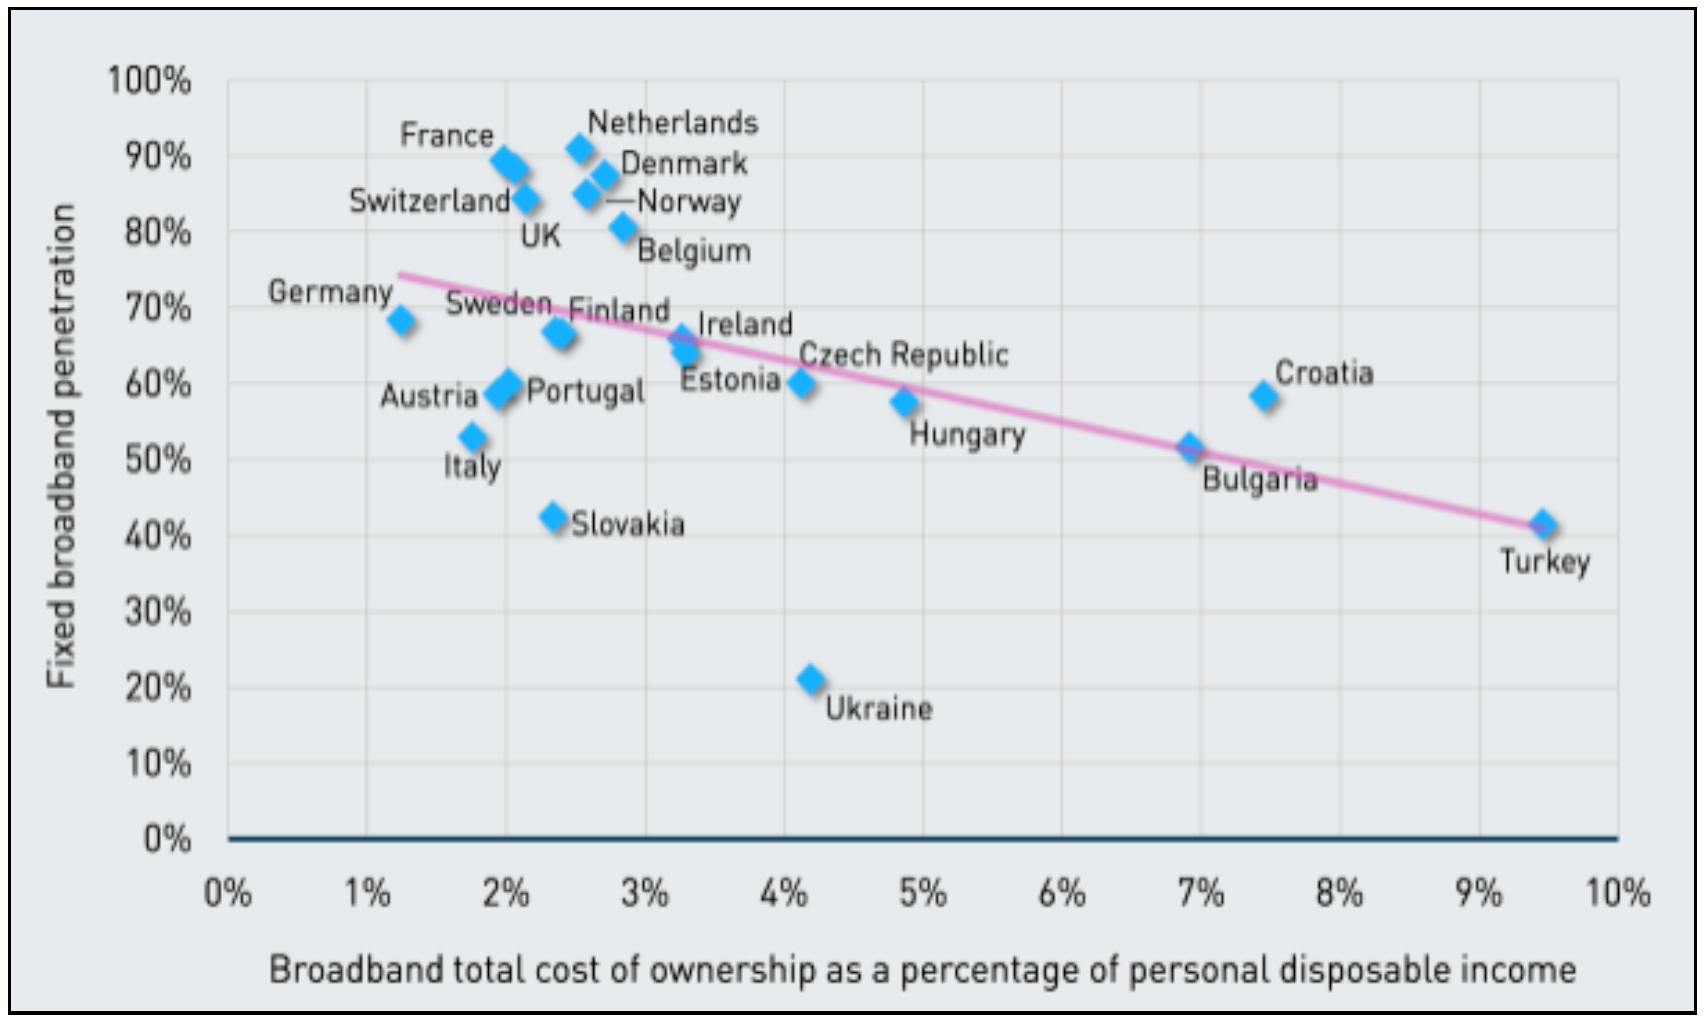 Figure 2. Relationship between affordability and fixed broadband penetration